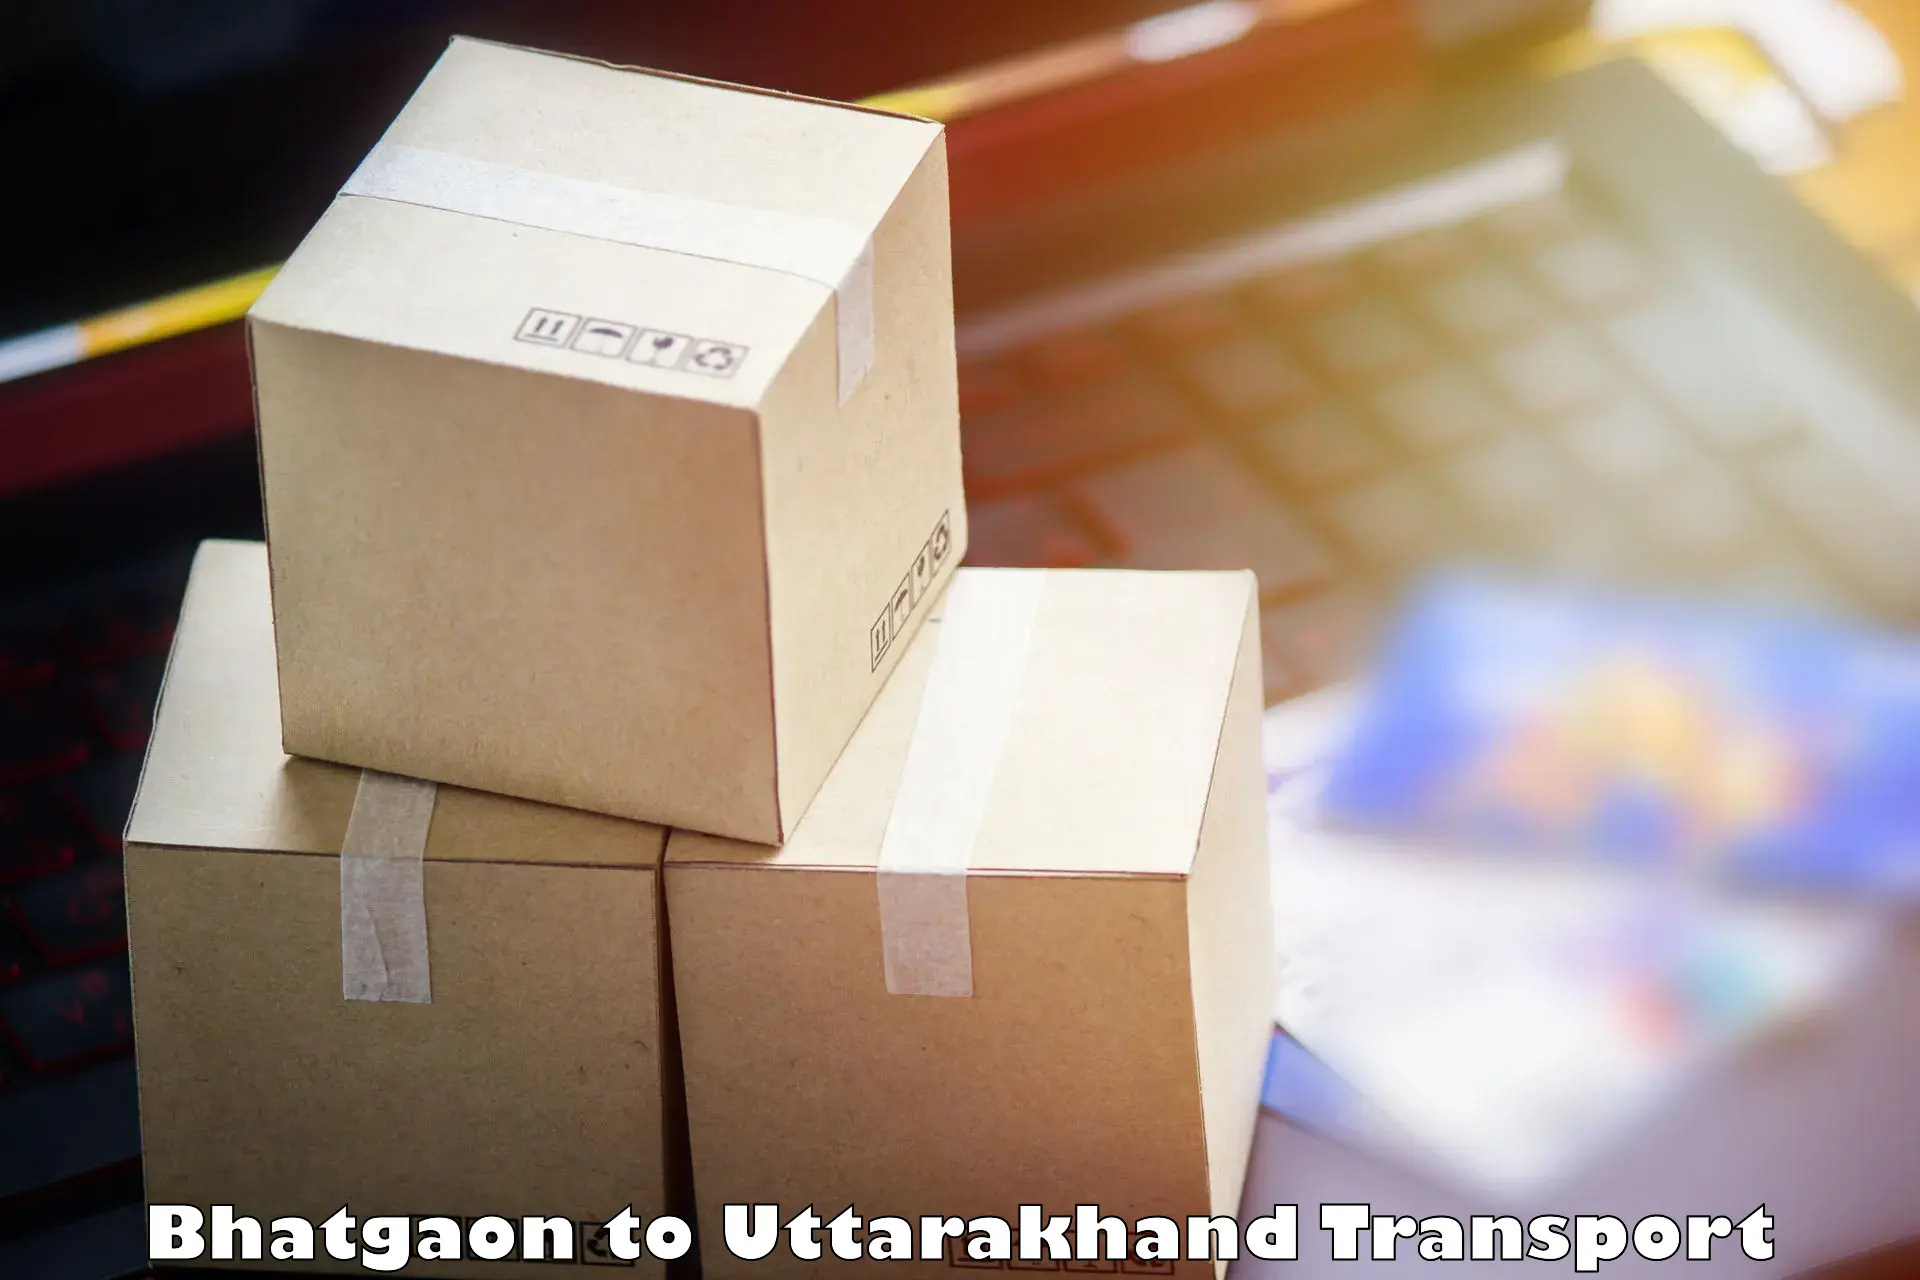 Container transport service Bhatgaon to Pauri